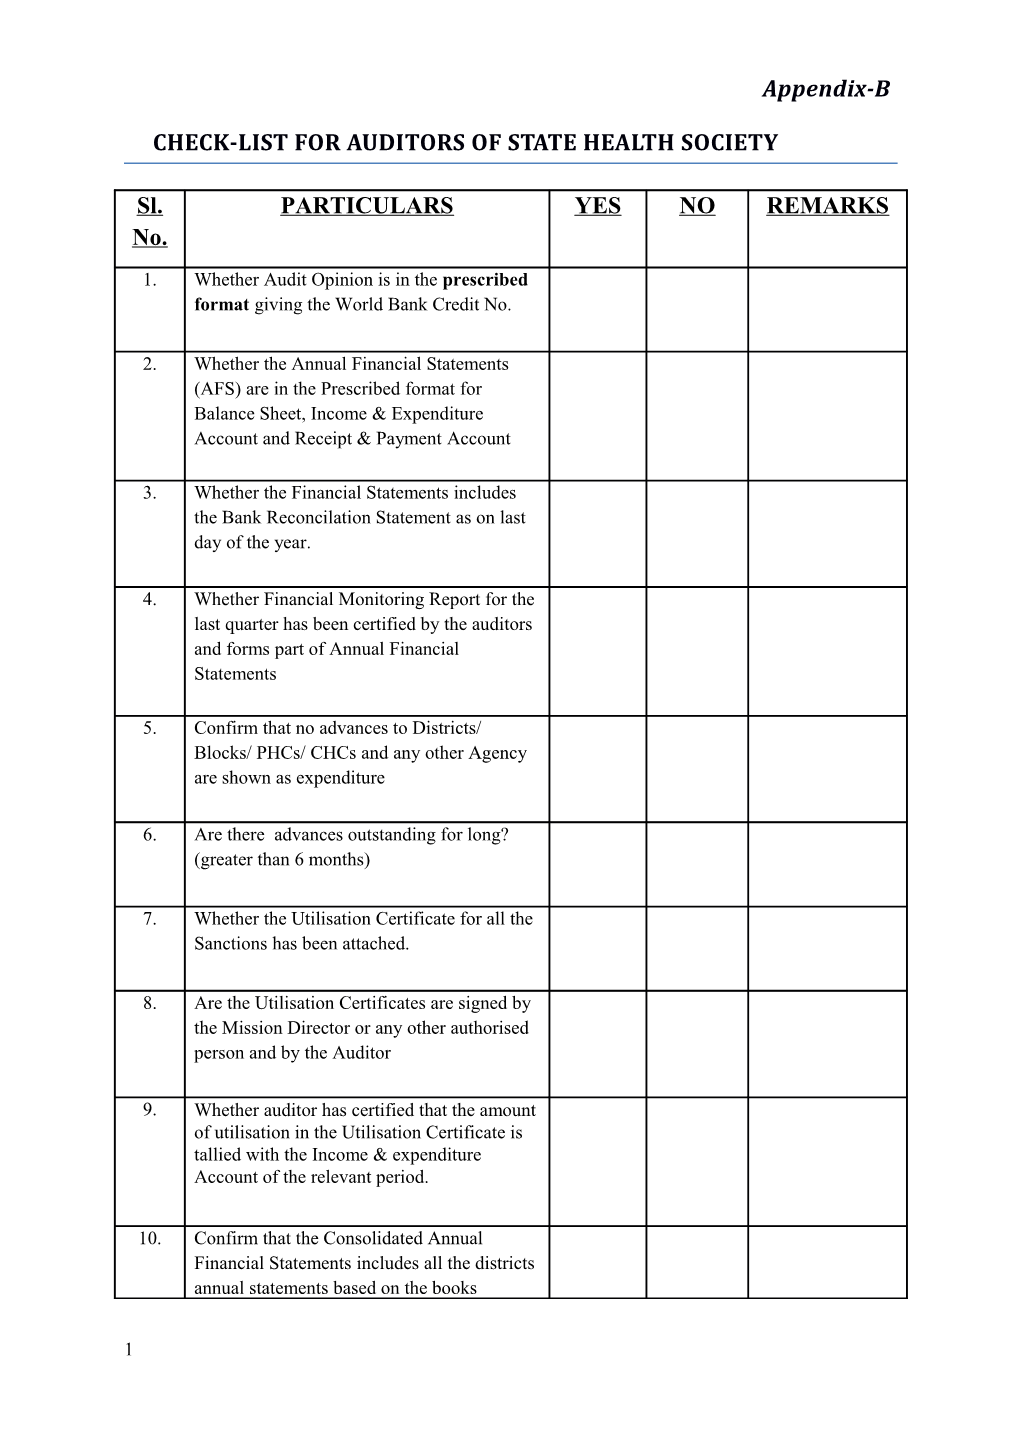 Check-List for Auditors of State Health Society